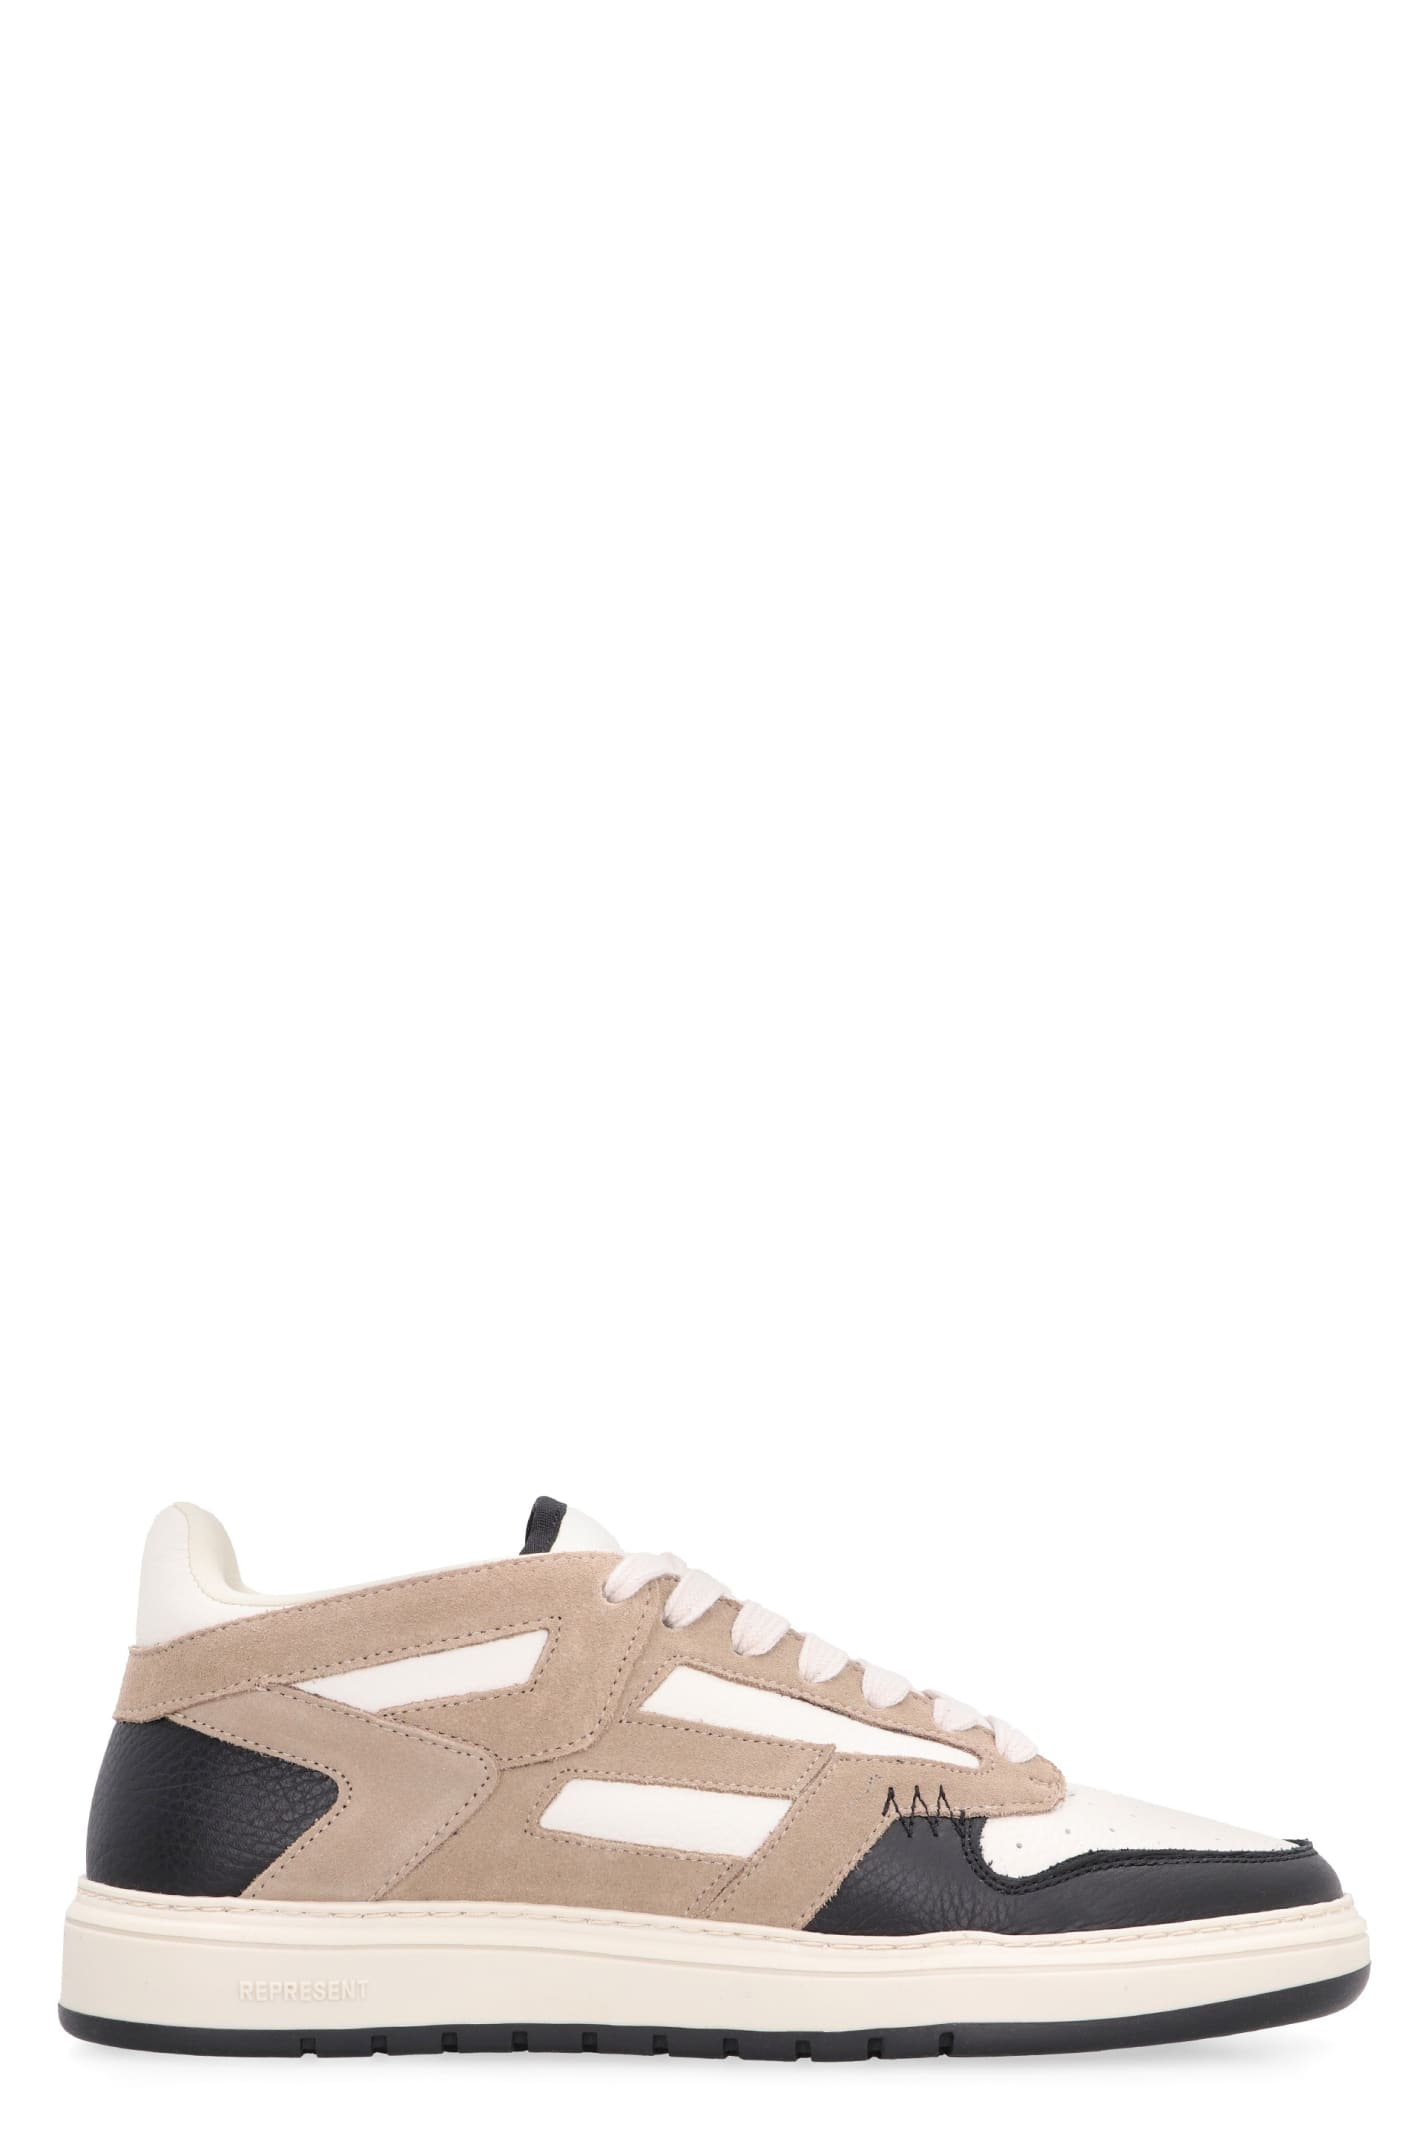 Shop Represent Storm Leather Low-top Sneakers In White